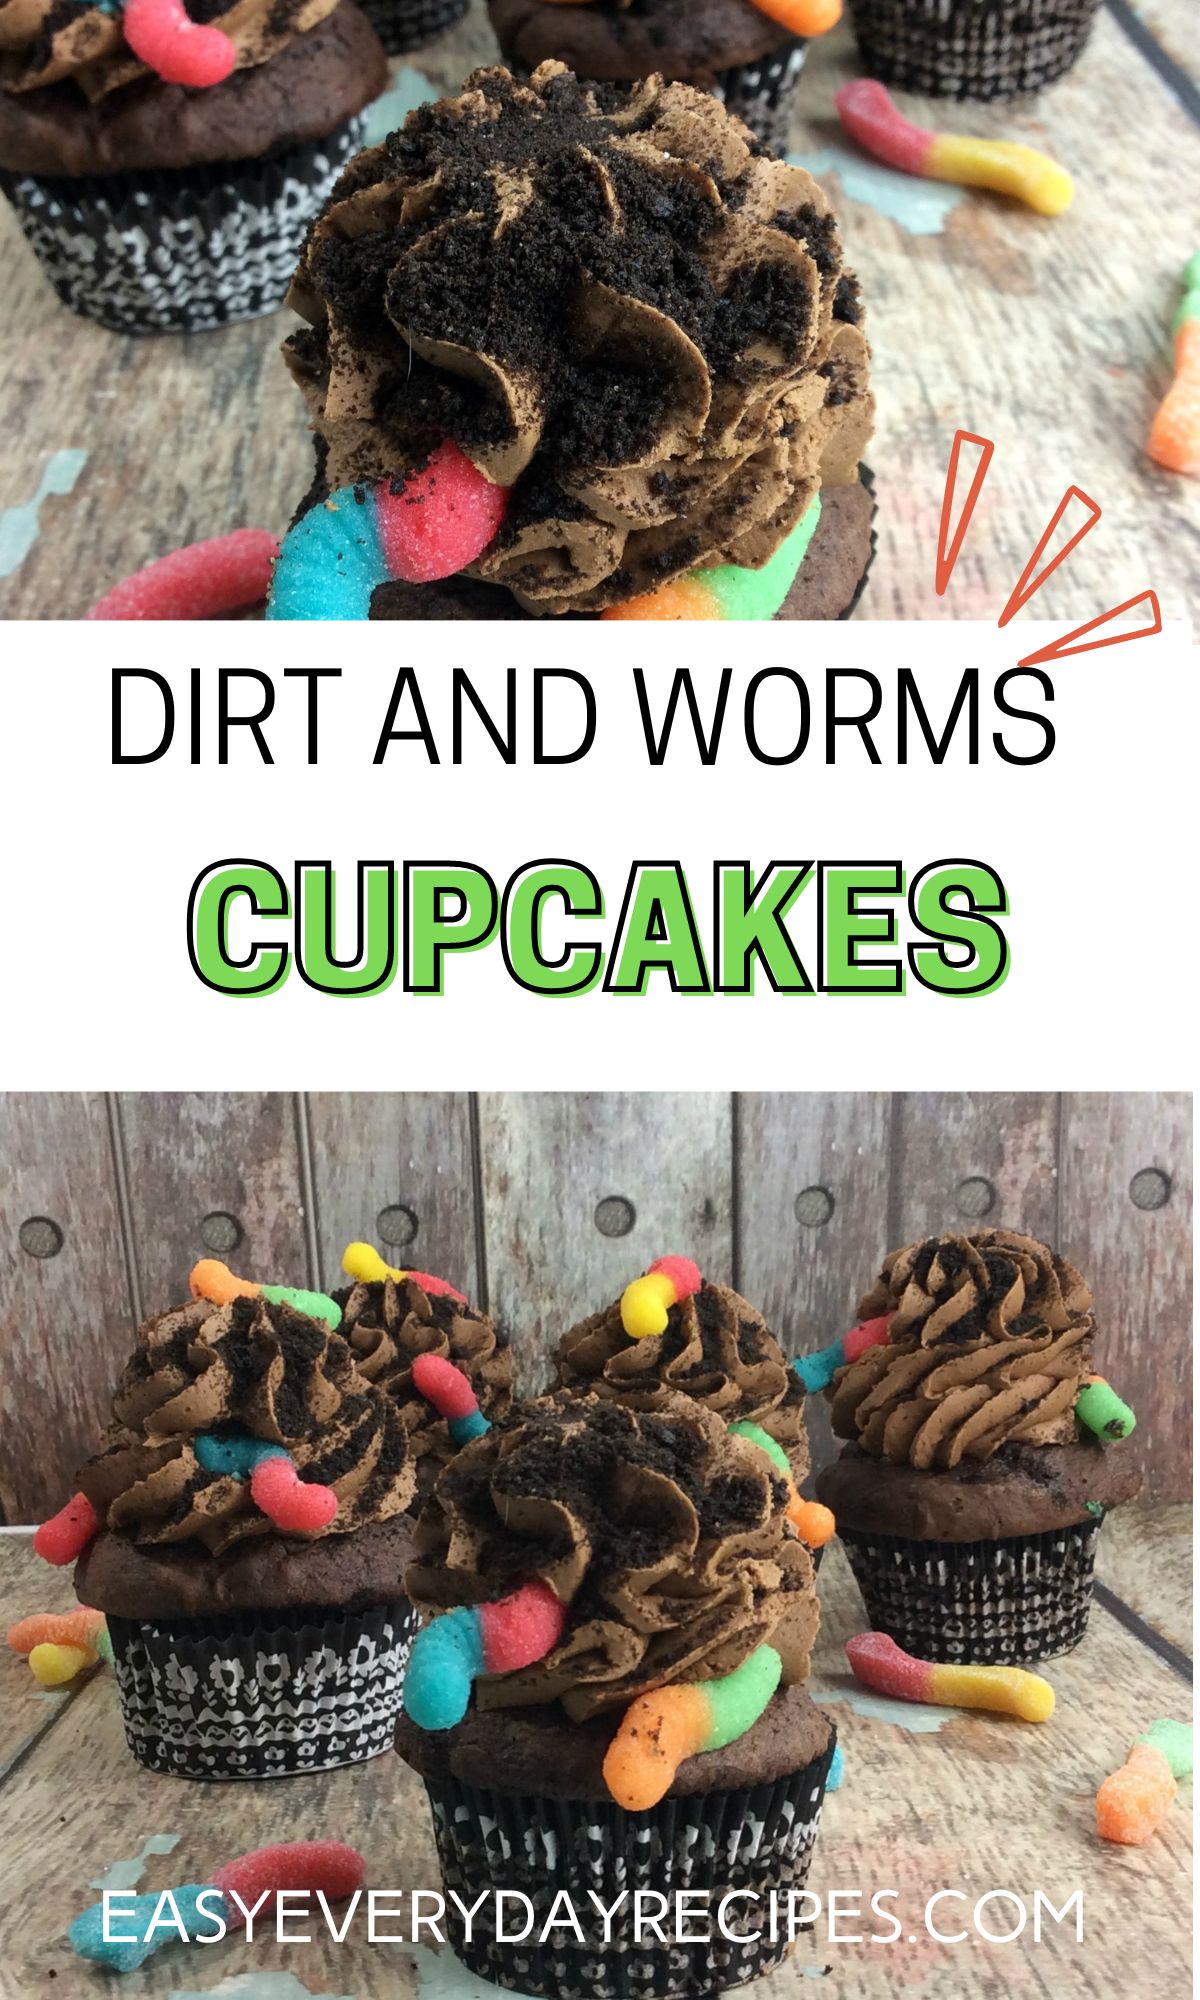 Dirt and worms cupcakes.